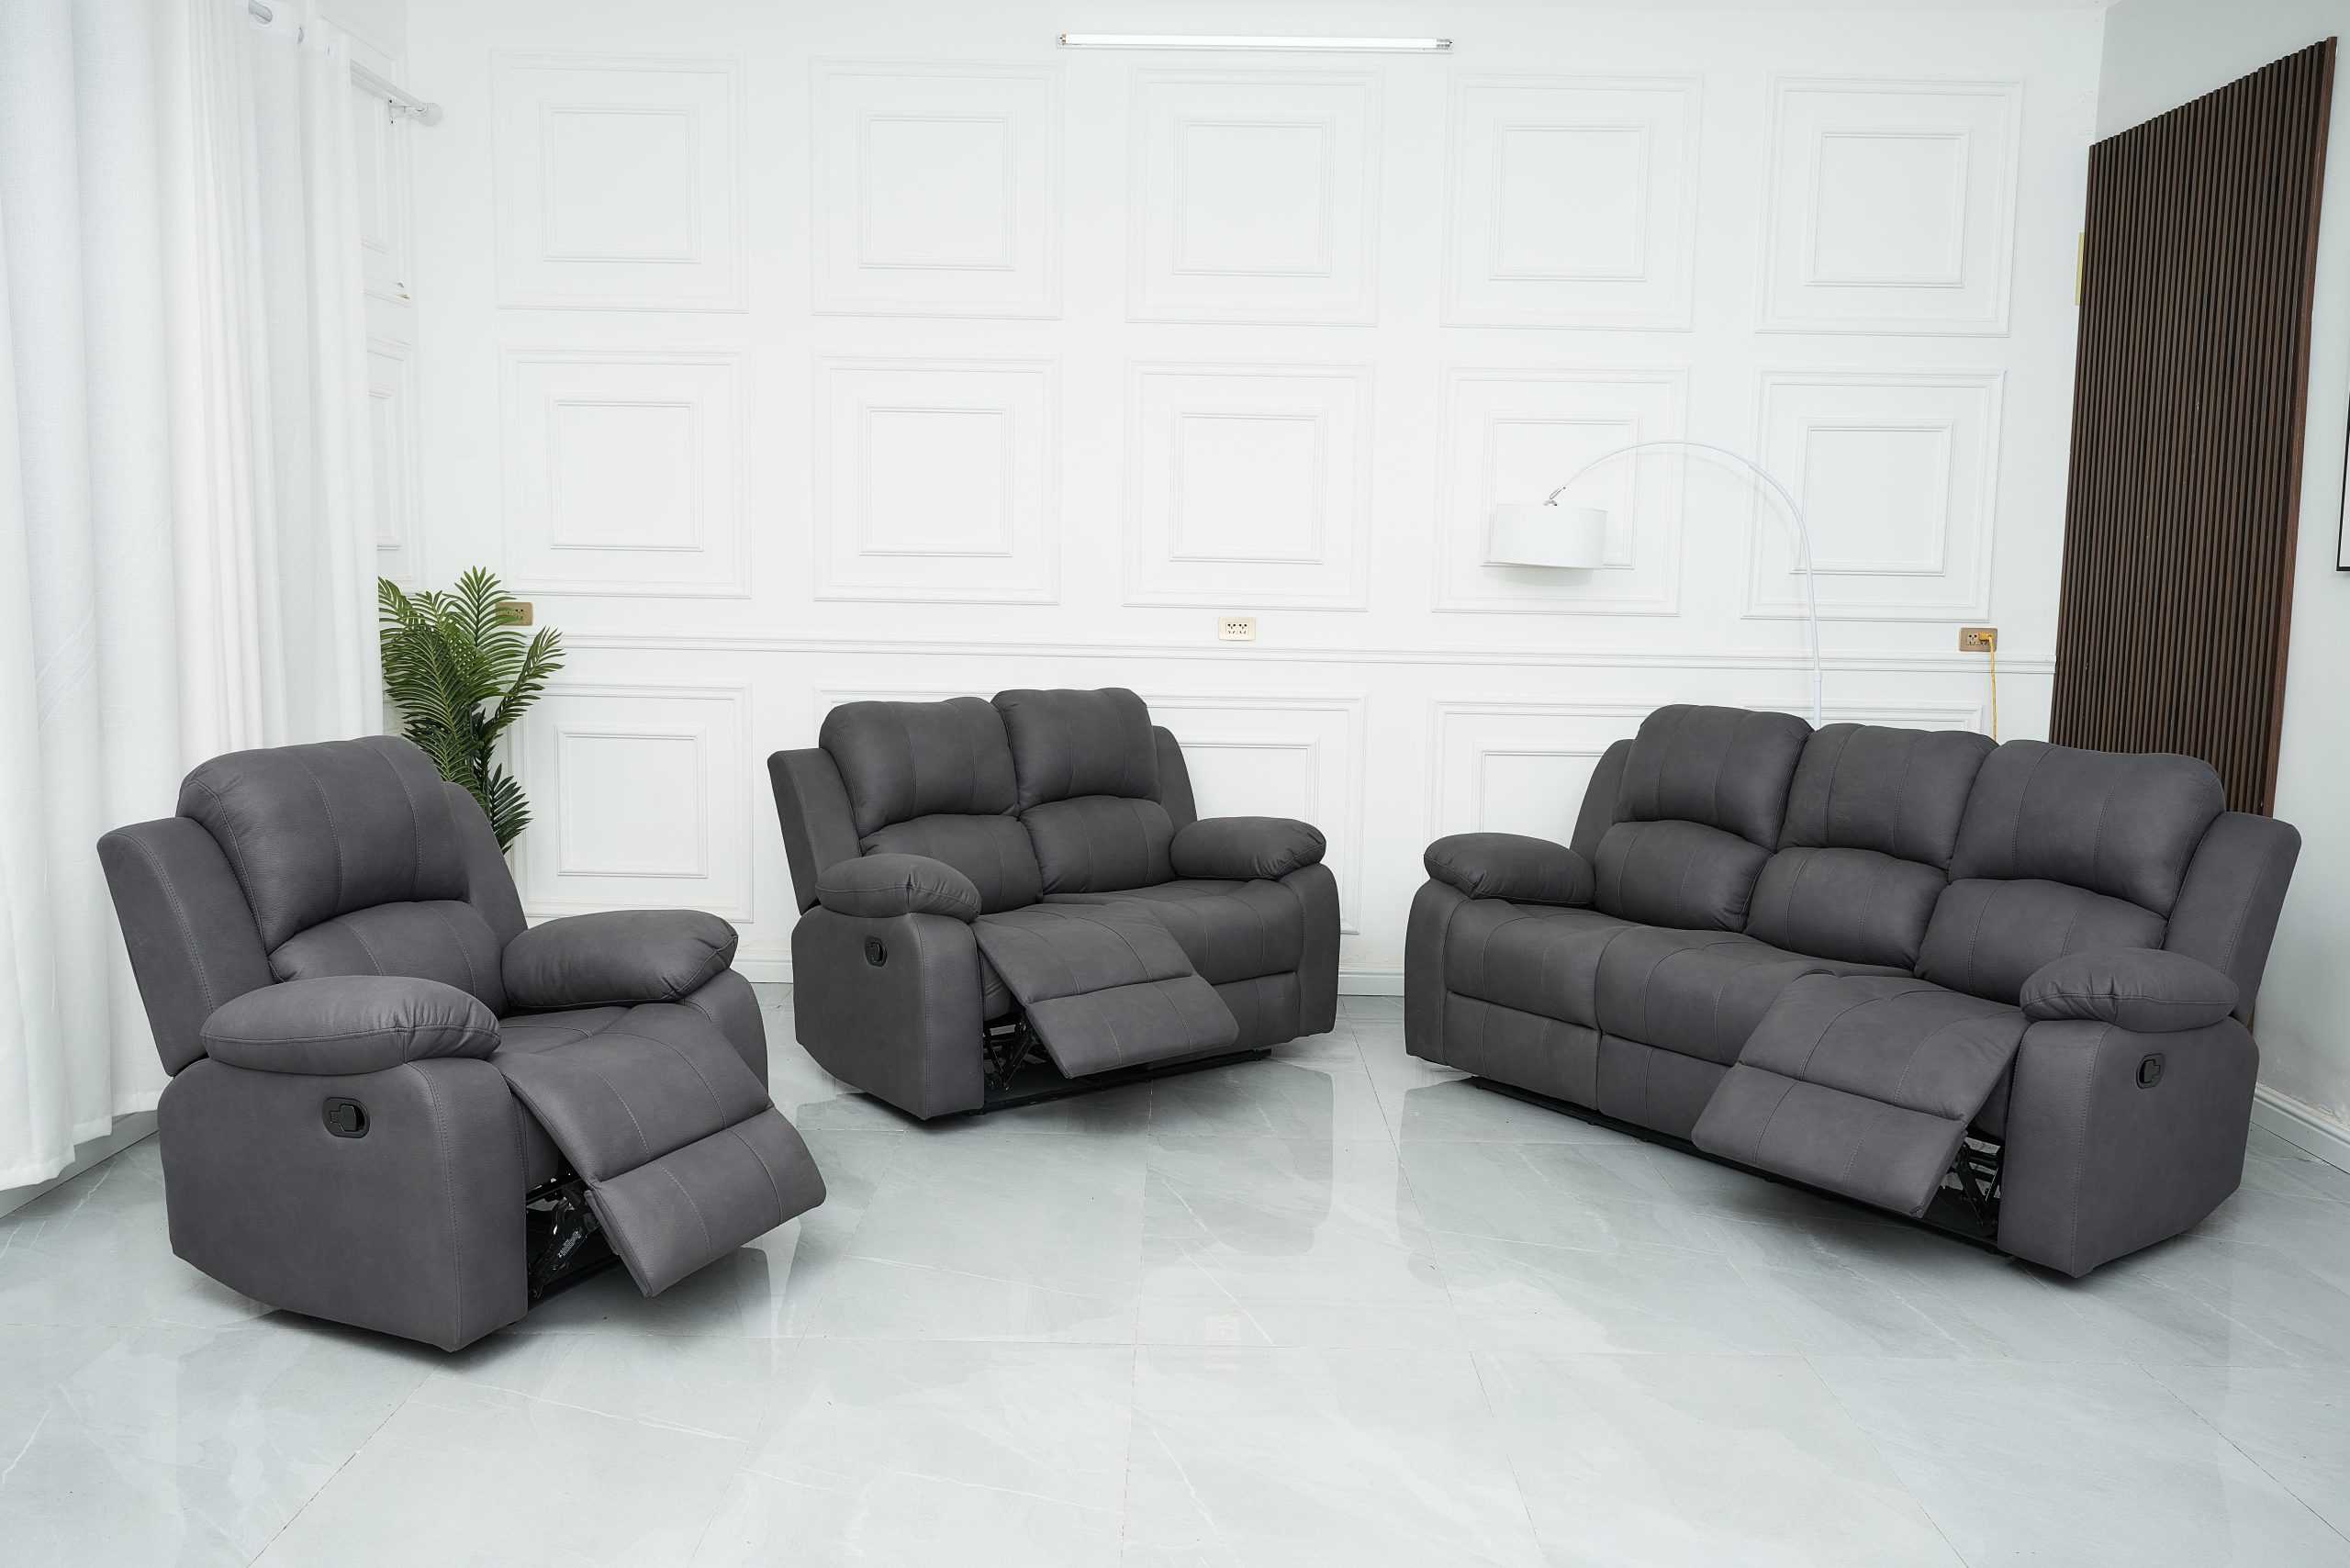 BT Valor Fabric 3 Seater, 2 Seater +1 Seater Manual Recliner Lounge Set